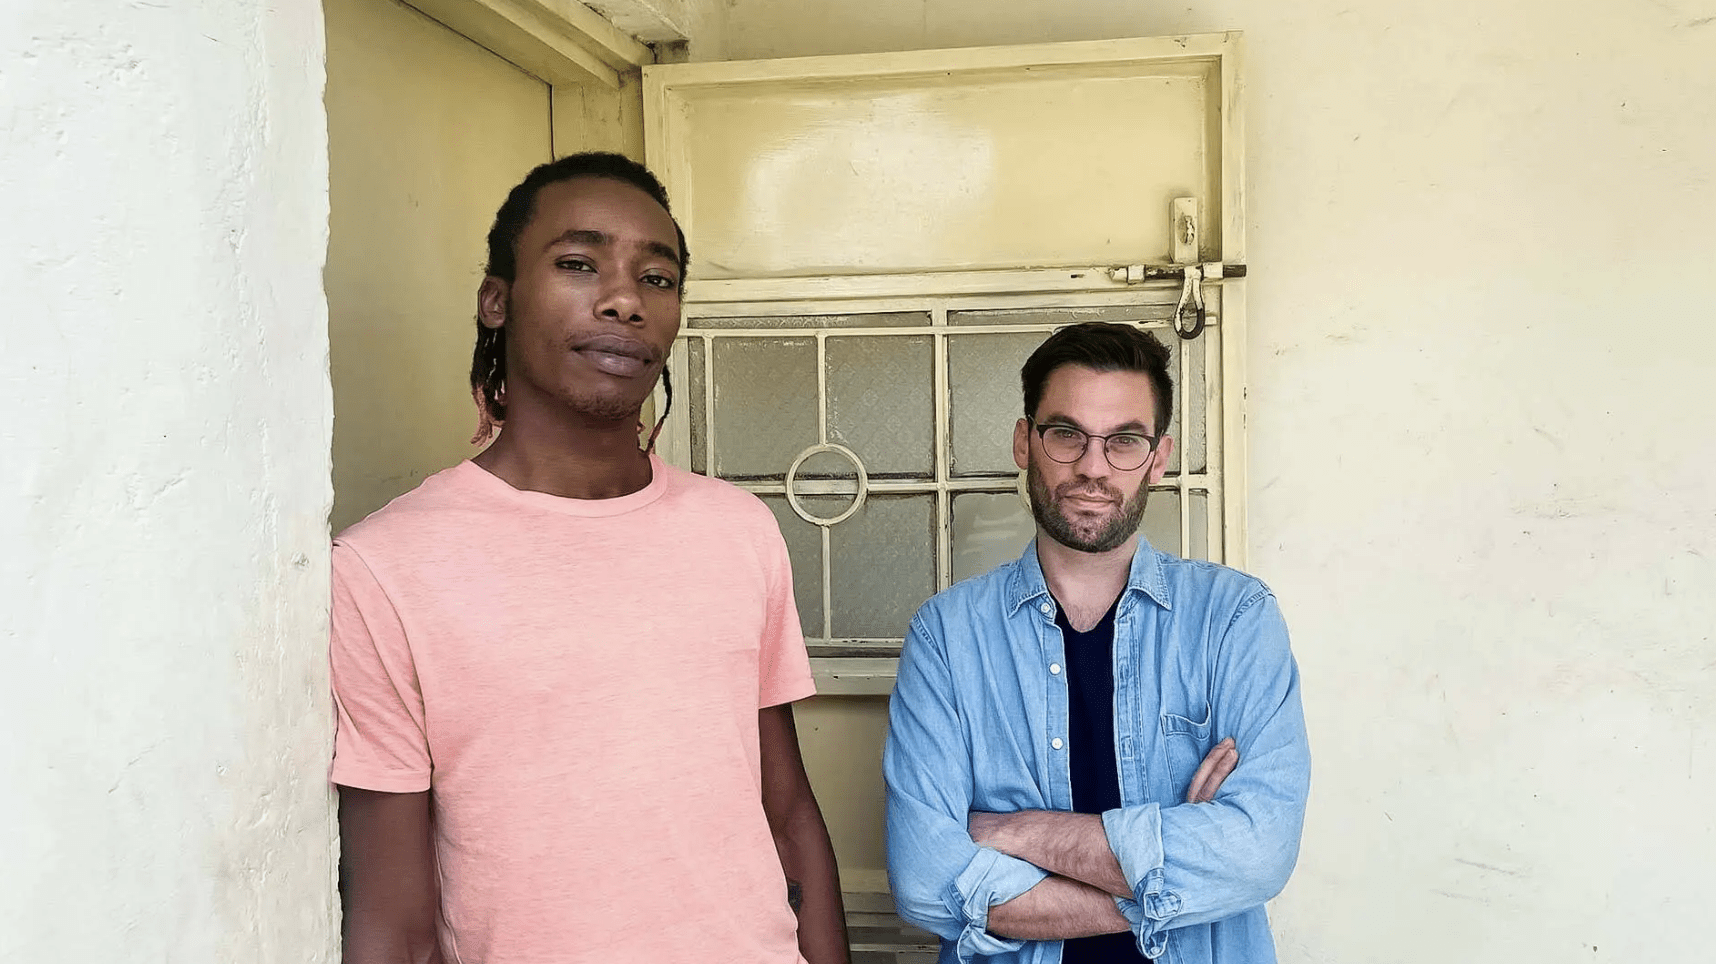  Matthew Thomann (right), an assistant professor of anthropology, and research assistant John Maina (left) stand outside the recovery center in Nairobi, Kenya.